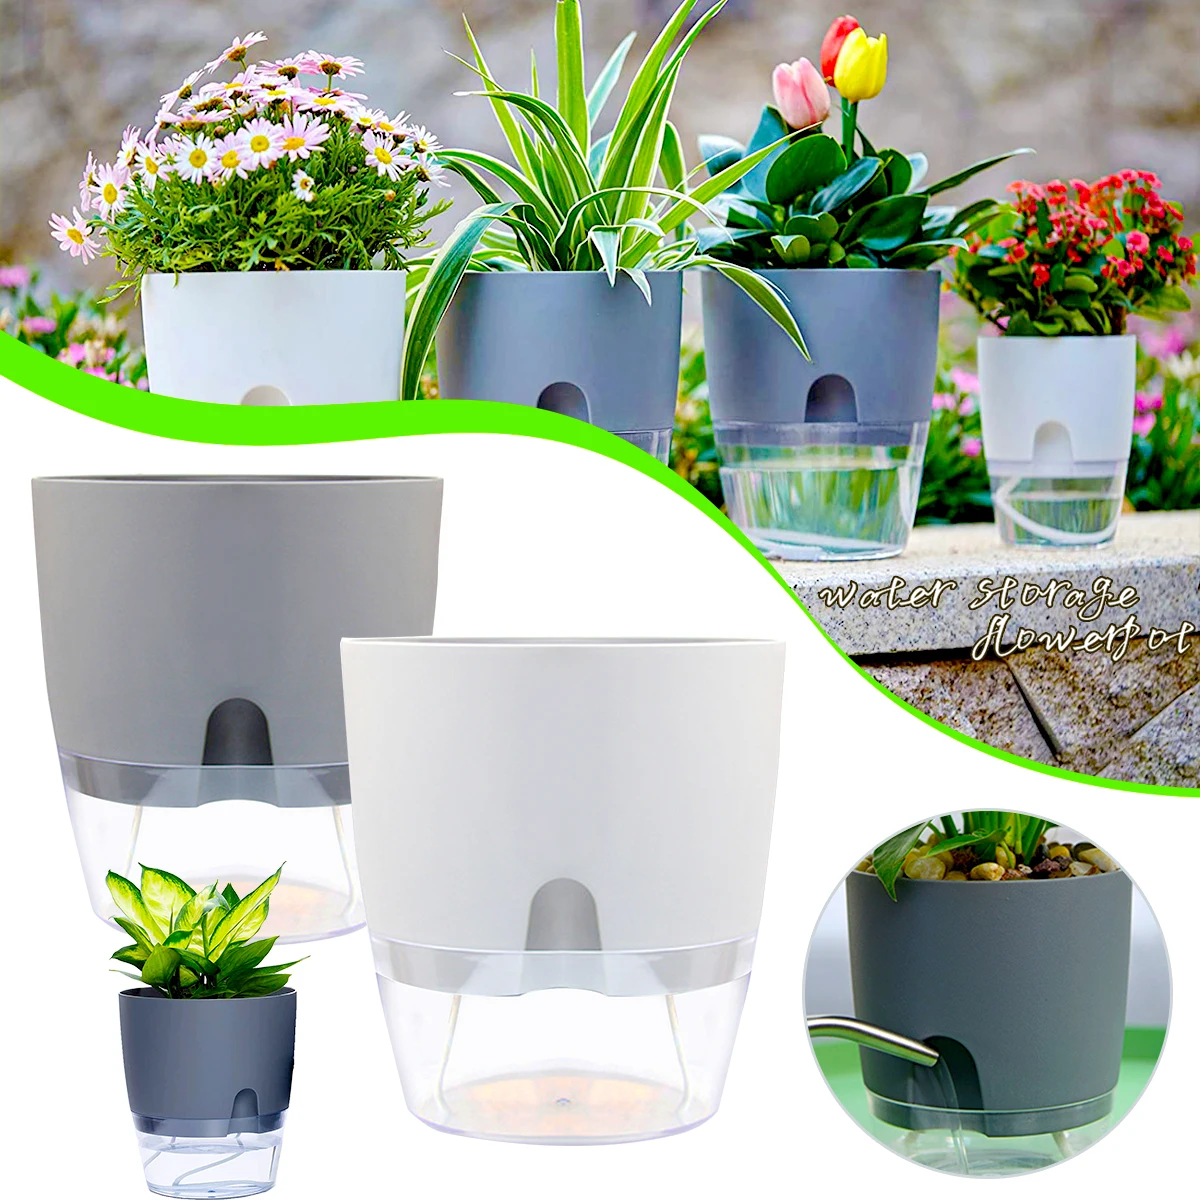 2 Layer Watering Planter Lazy Self Watering Pot Automatic Succulent Container for Flower Plant Indoor Supplies White Gray